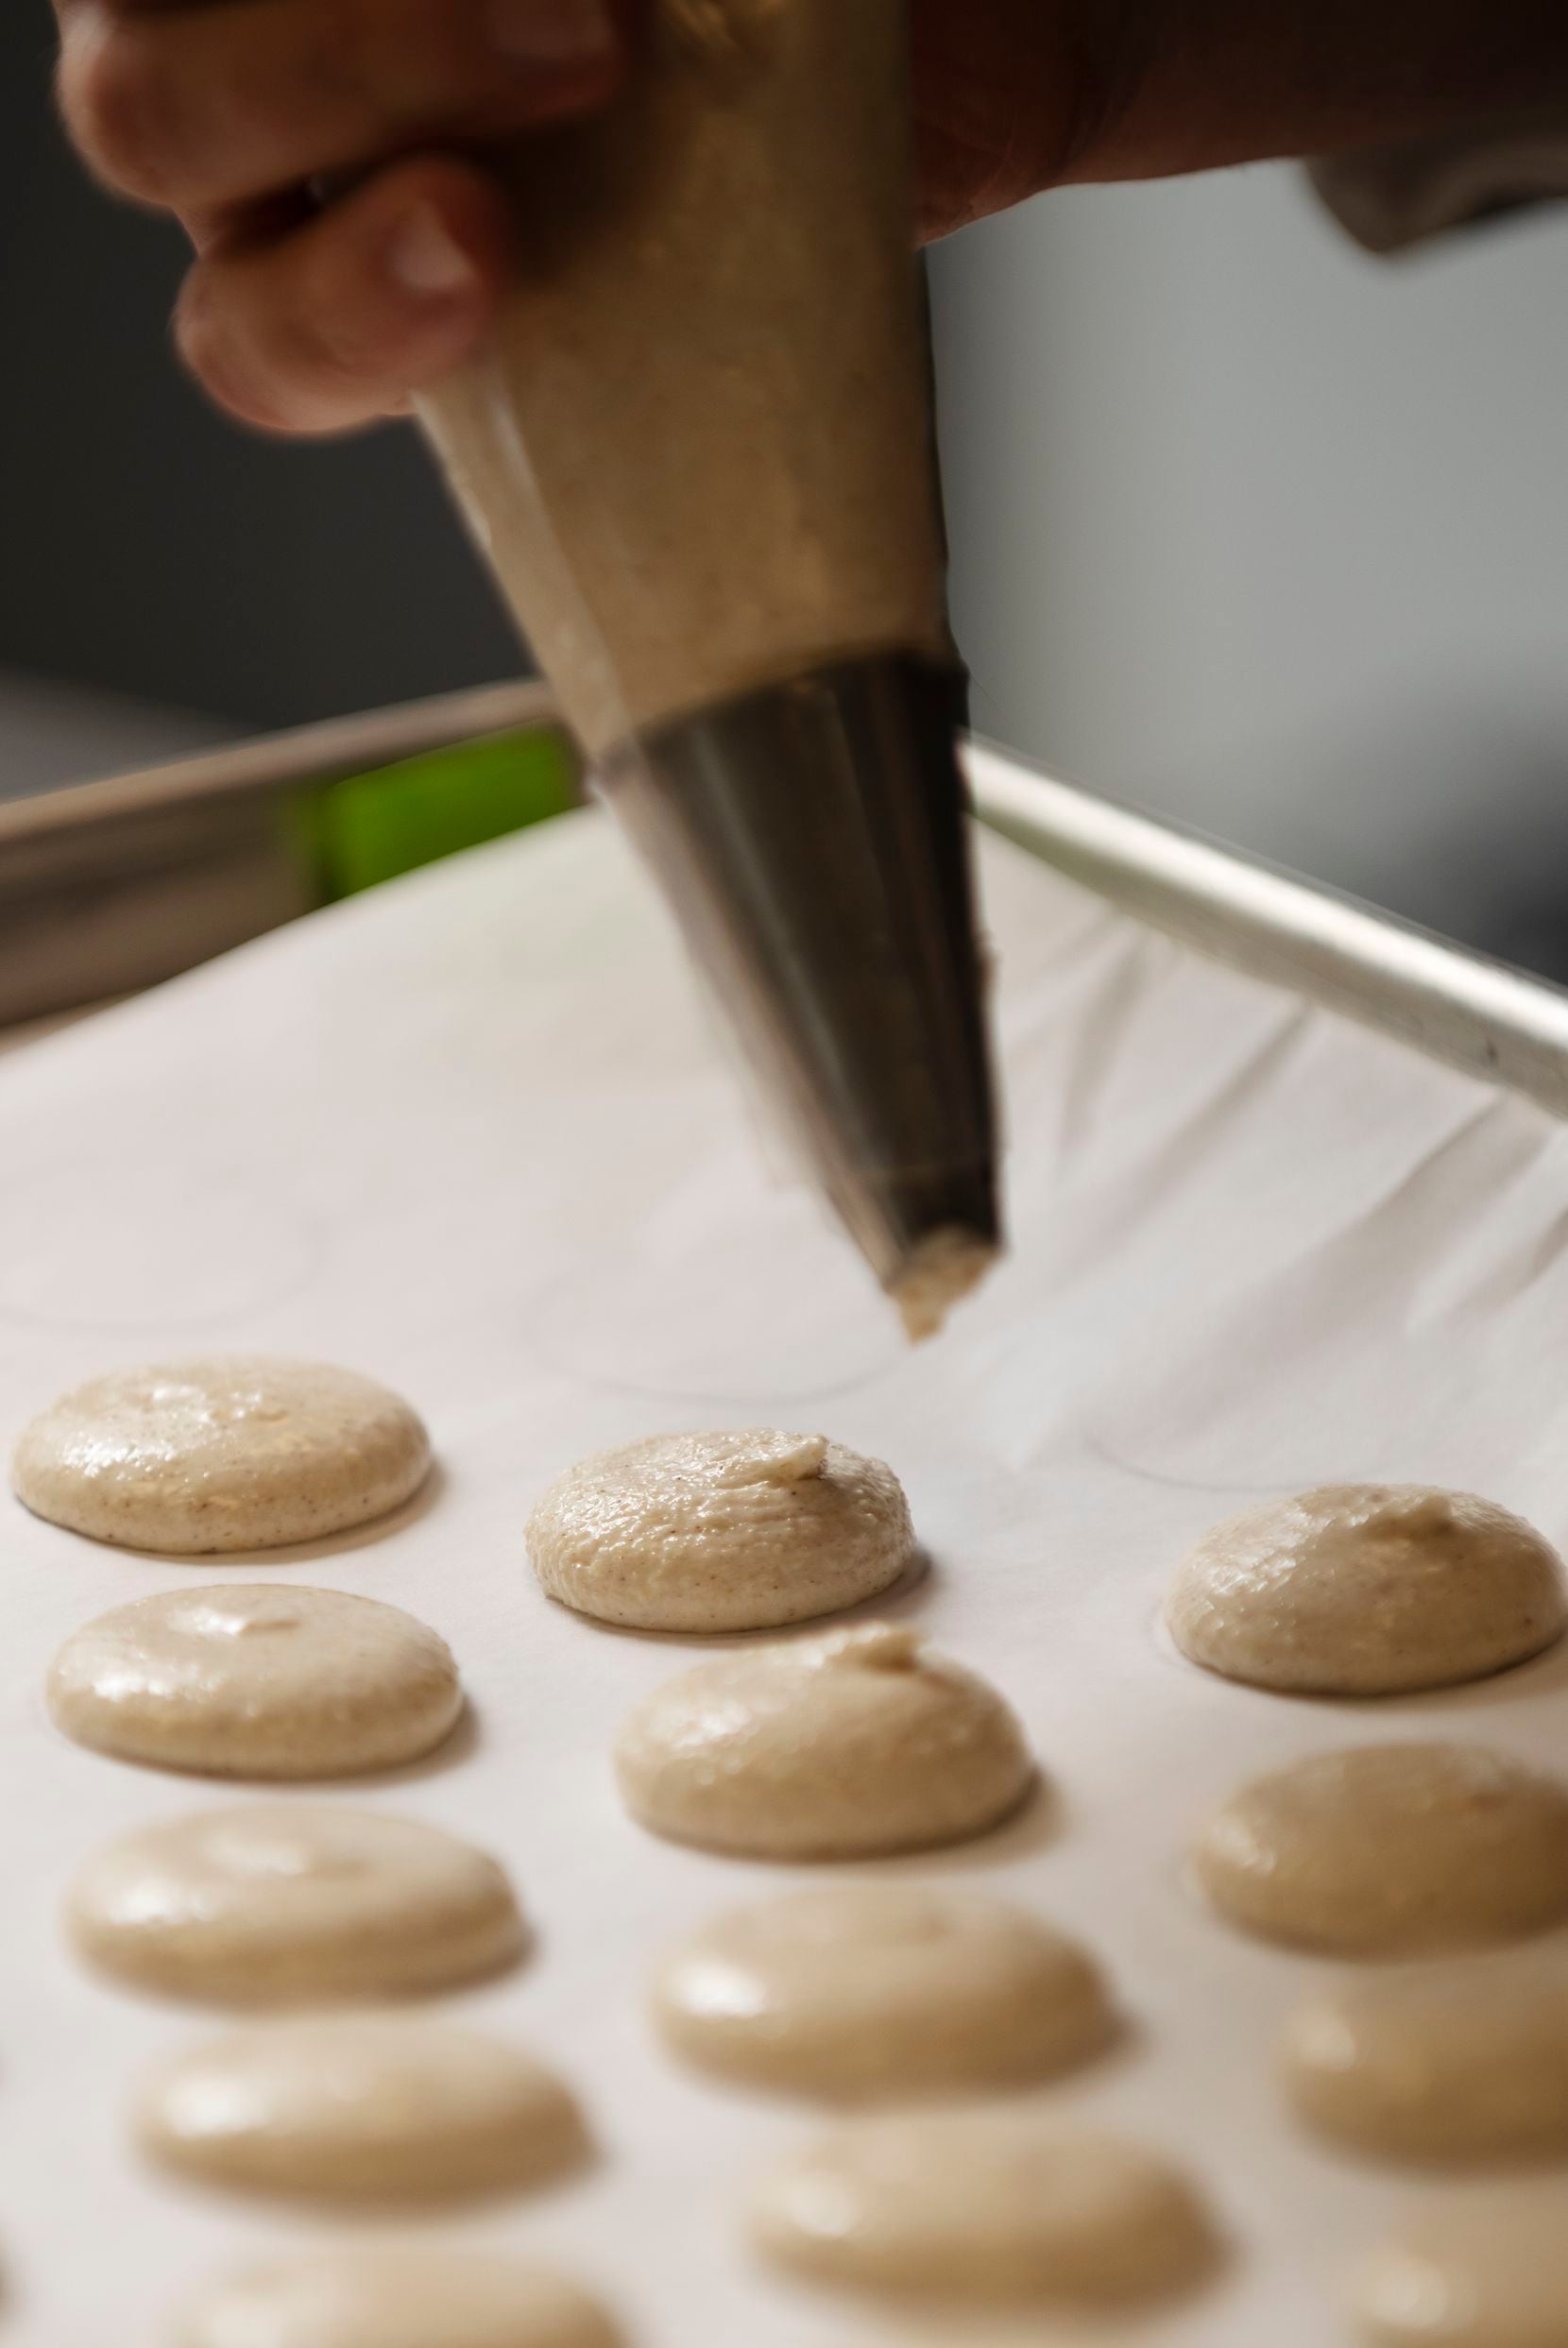 Andrea Meyer, of Bisous Bisous Patisserie, pipes macaron batter into small rounds on a...